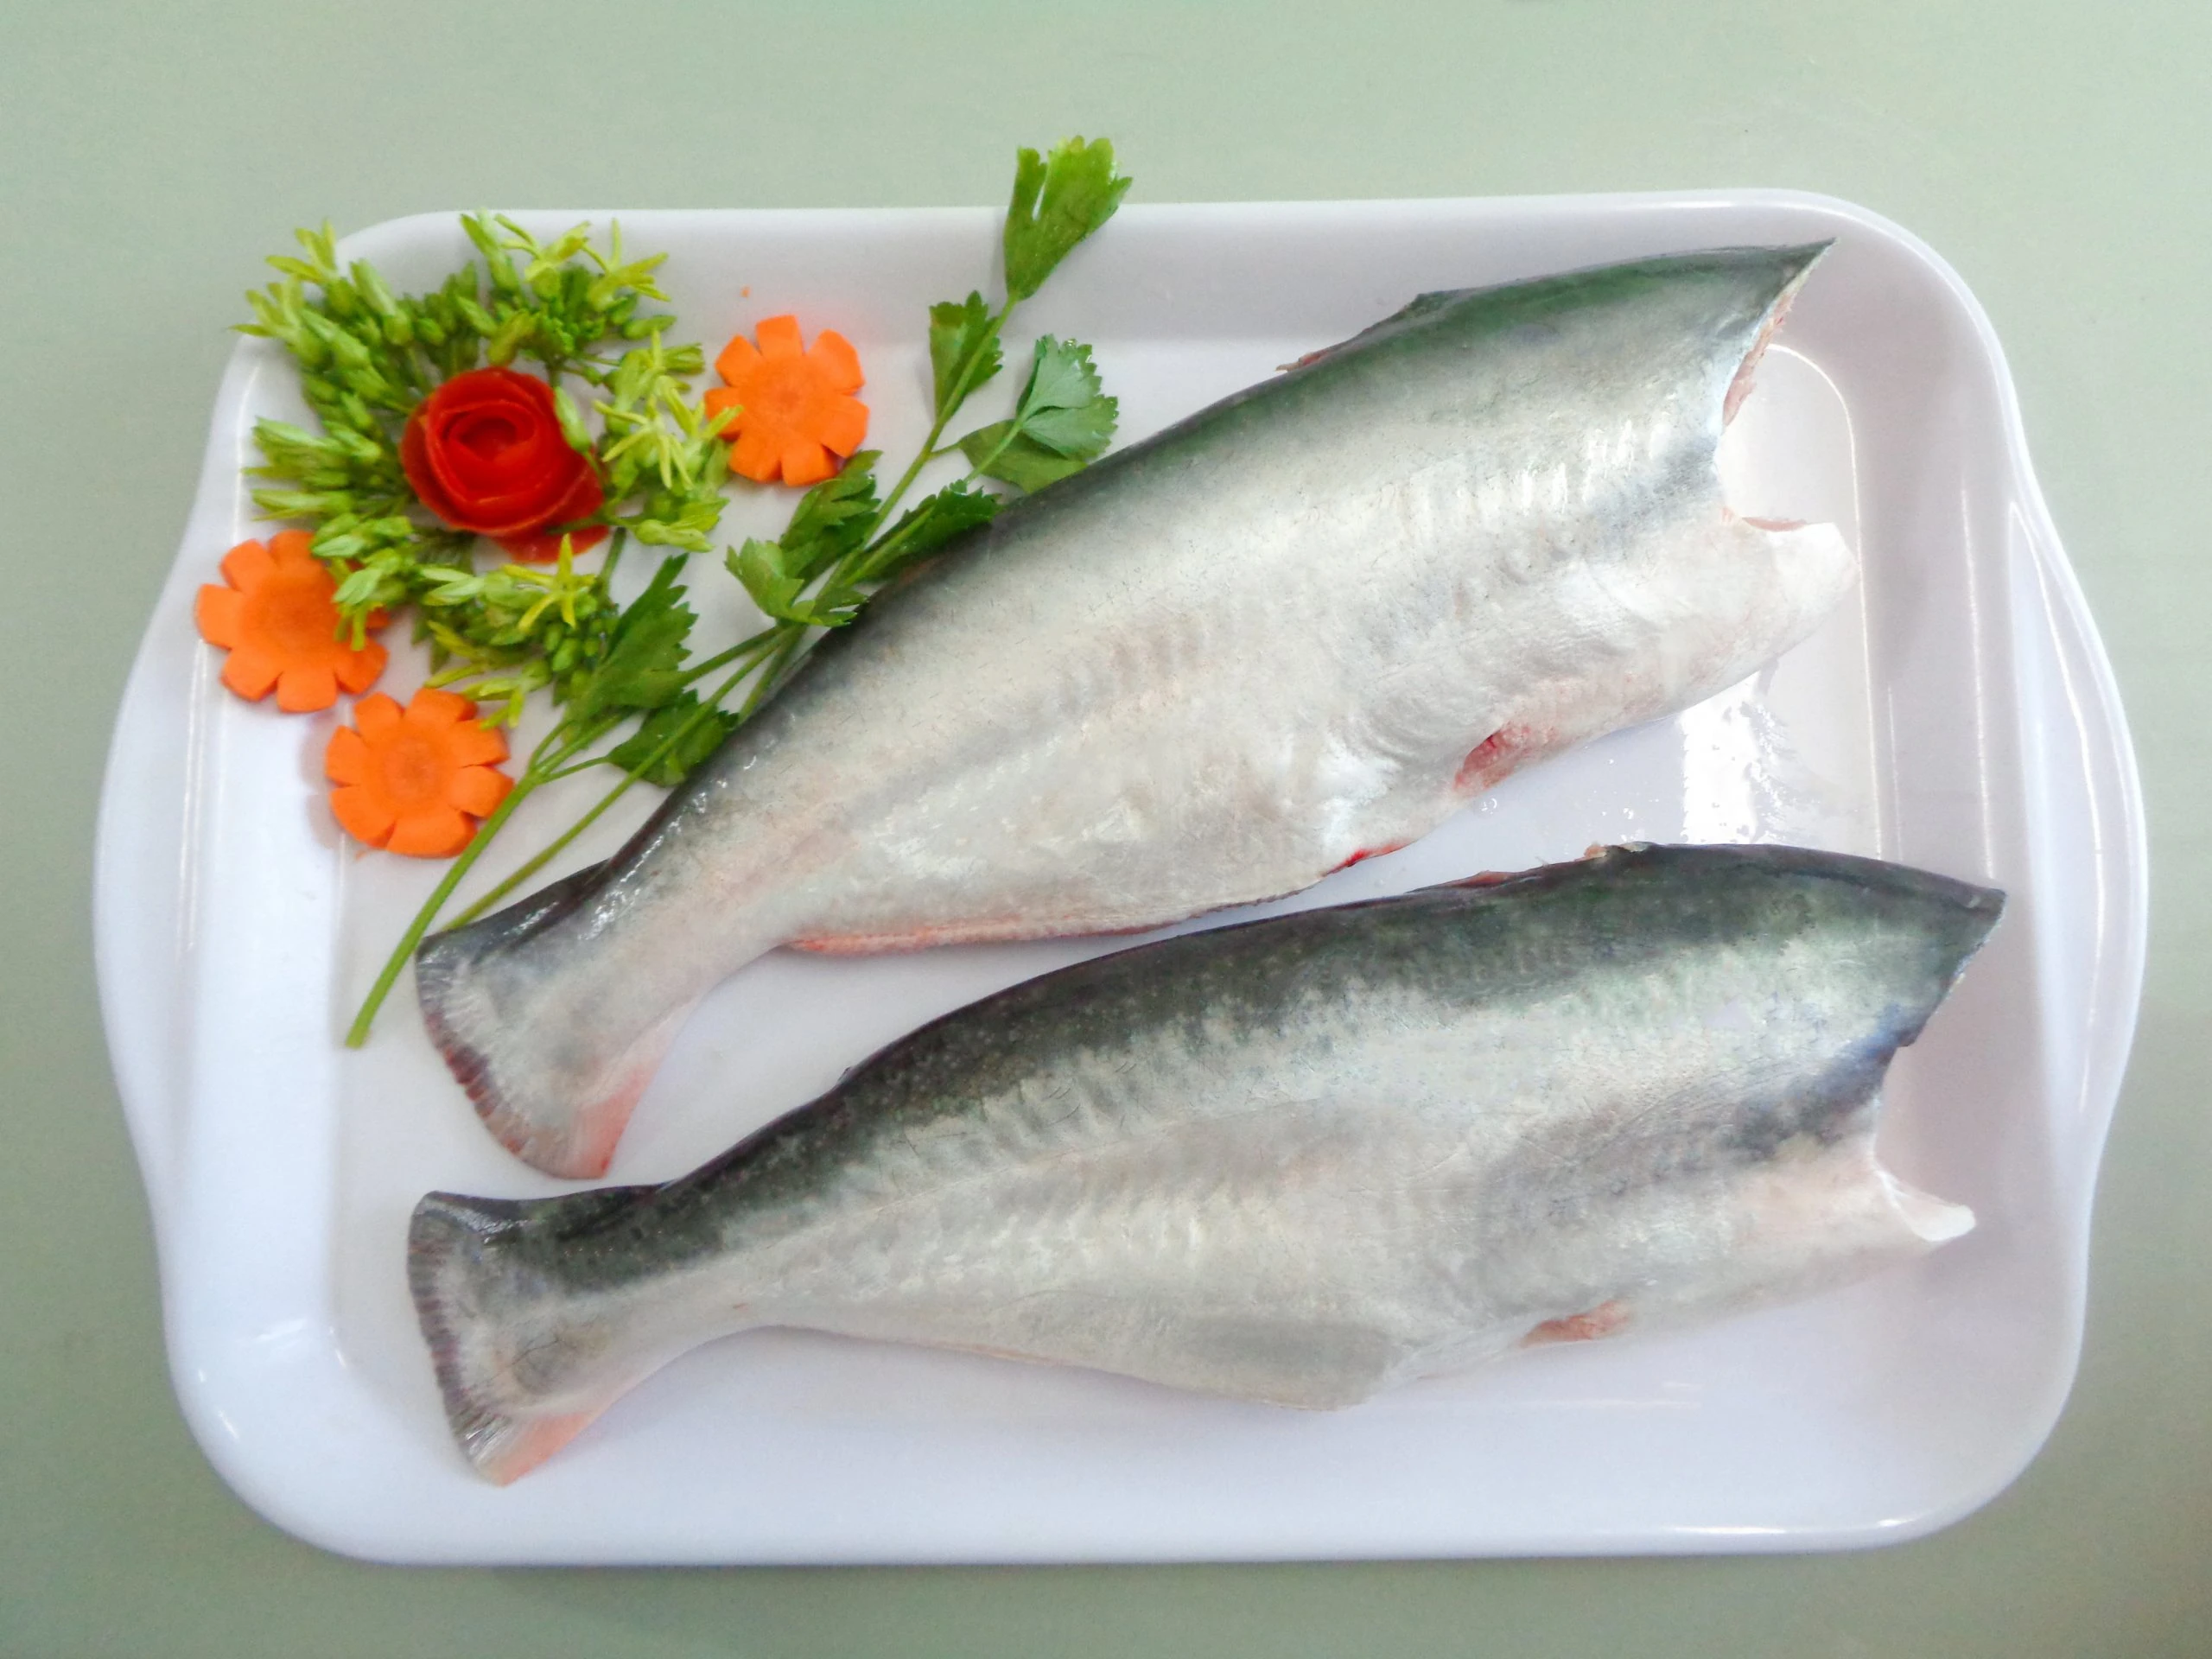 First 2 months China and Hong Kong imported 75 million USD of Vietnamese pangasius